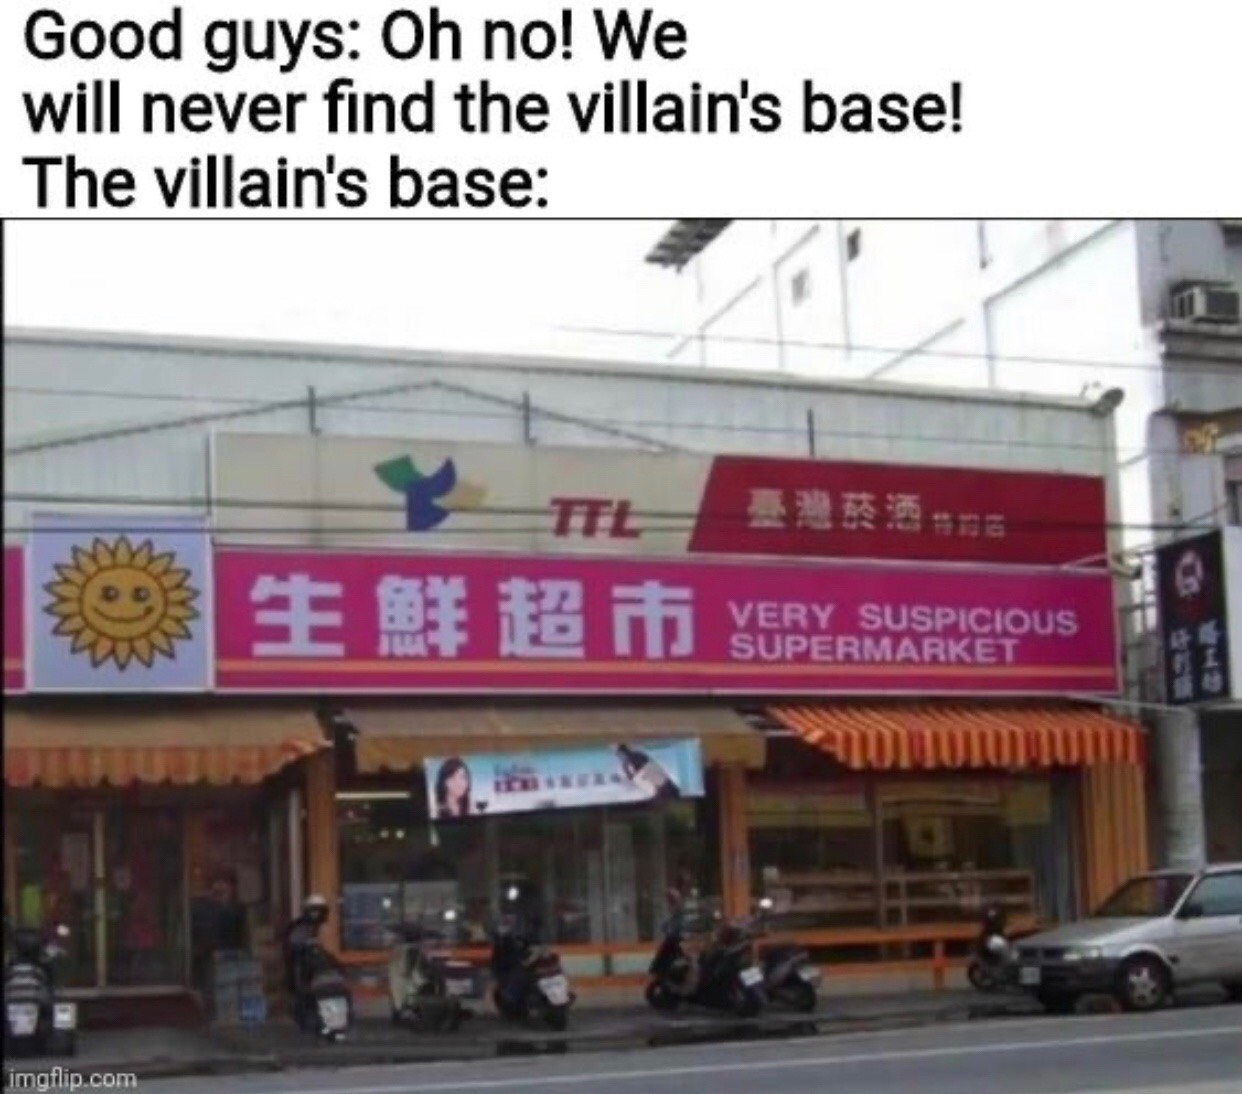 very suspicious supermarket - Good guys Oh no! We will never find the villain's base! The villain's base Very Suspicious Supermarket imgflip.com